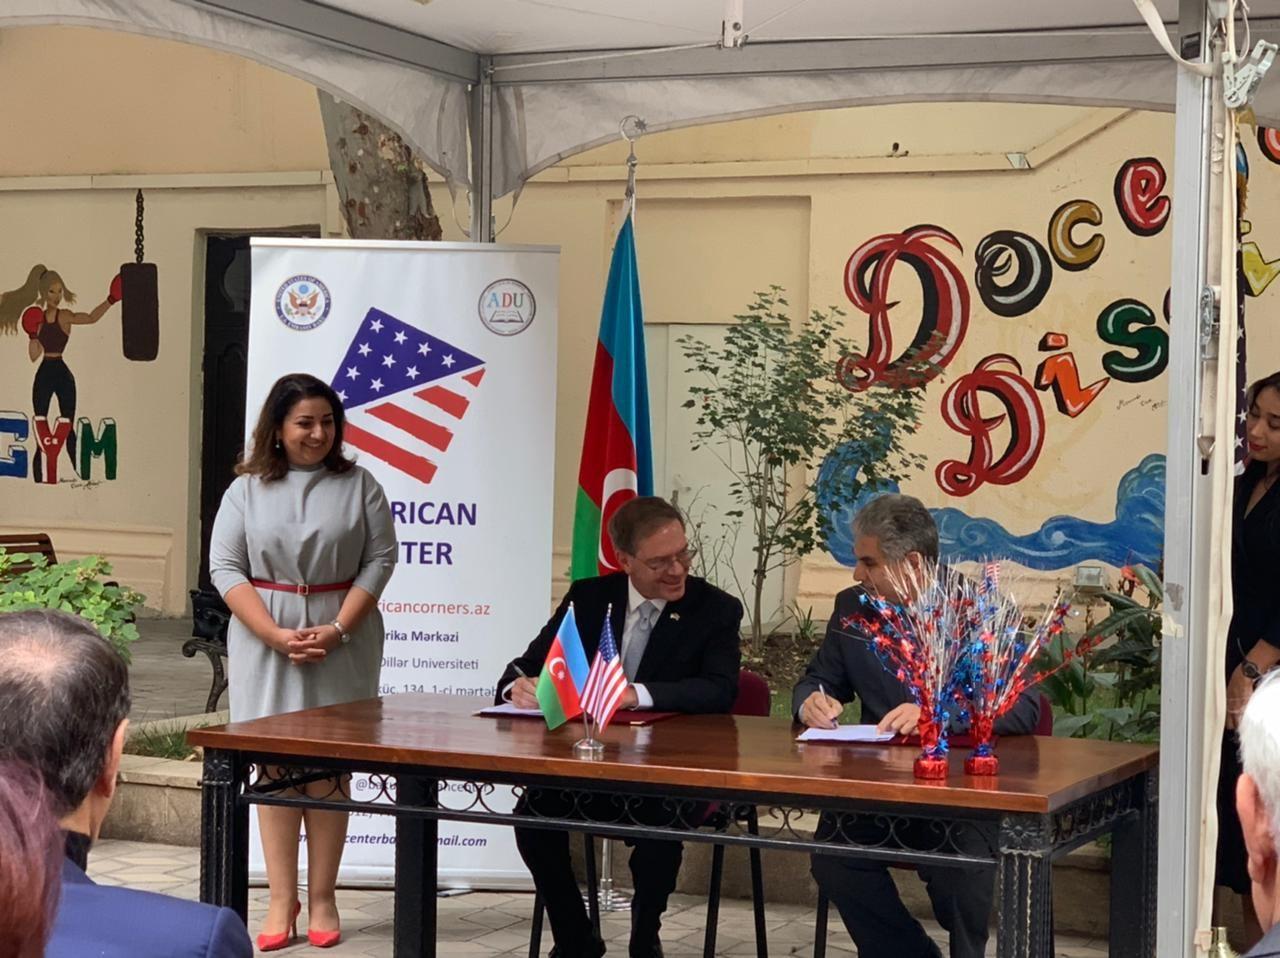 More US centers to appear in Azerbaijani cities